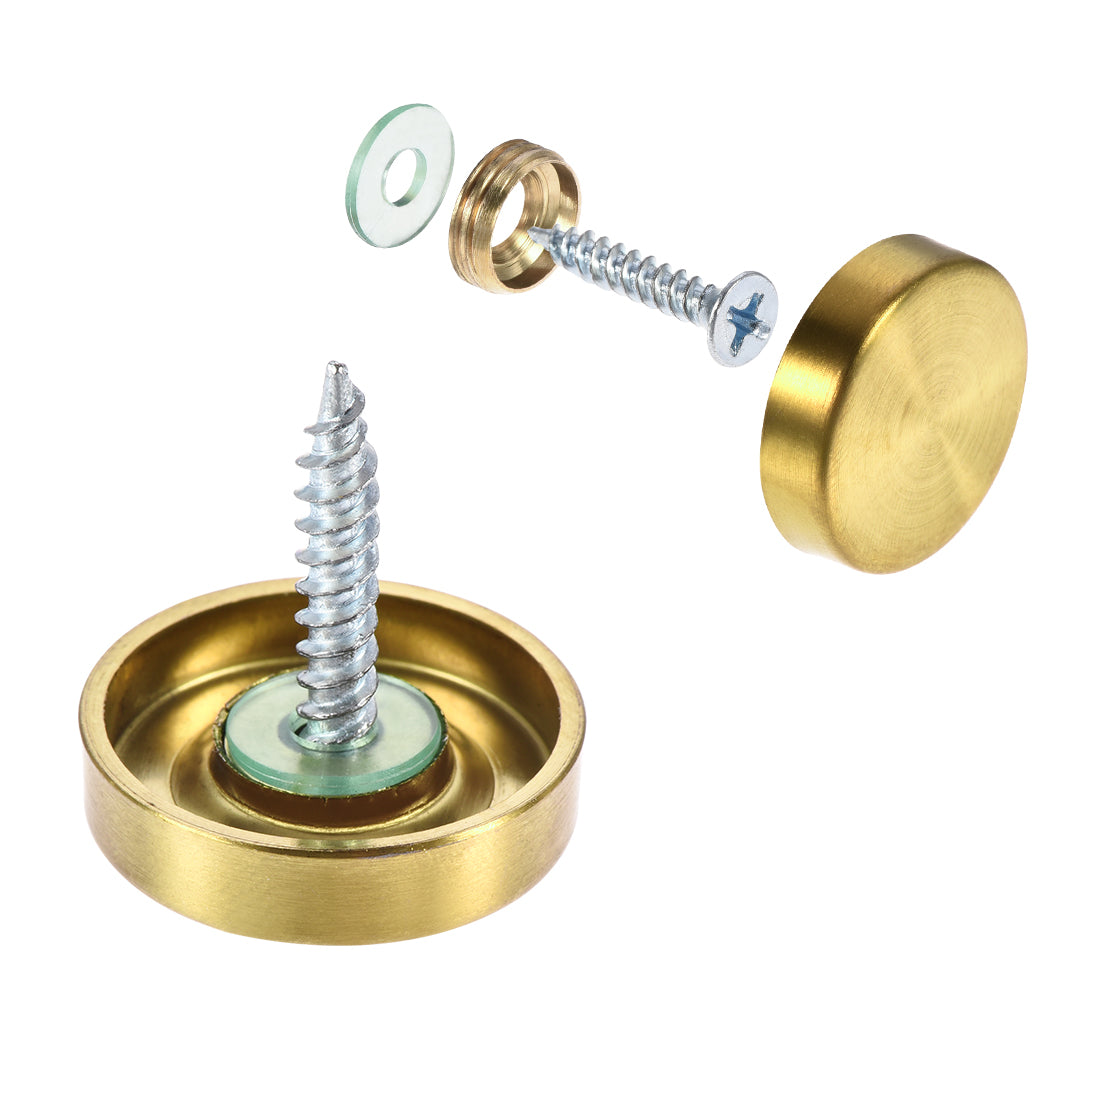 Uxcell Uxcell Mirror Screws, Decorative Cap Fasteners Cover Nails, Electroplated Wire Drawing, Golden 25mm/0.98" 12pcs